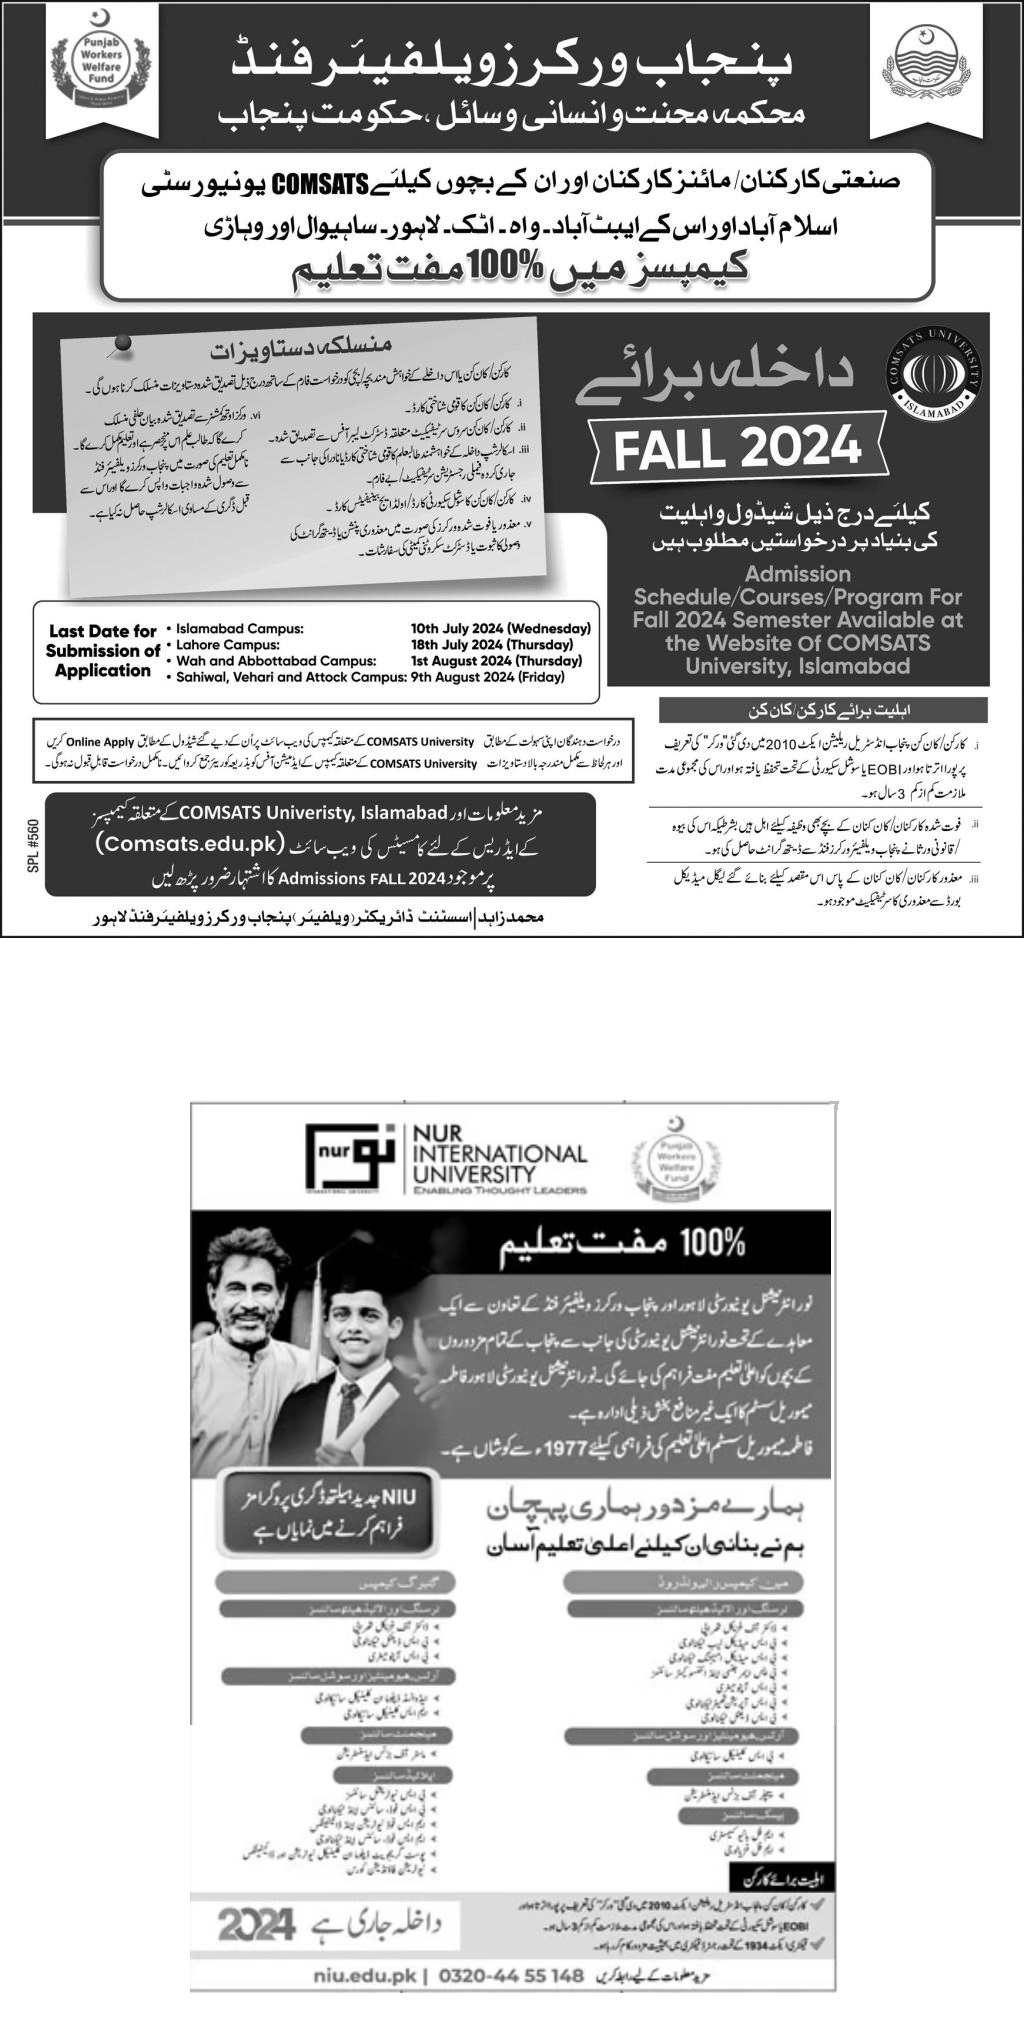 100% Free Education in COMSATS University and NUR International University | Workers Welfare Fund  FALL 2024